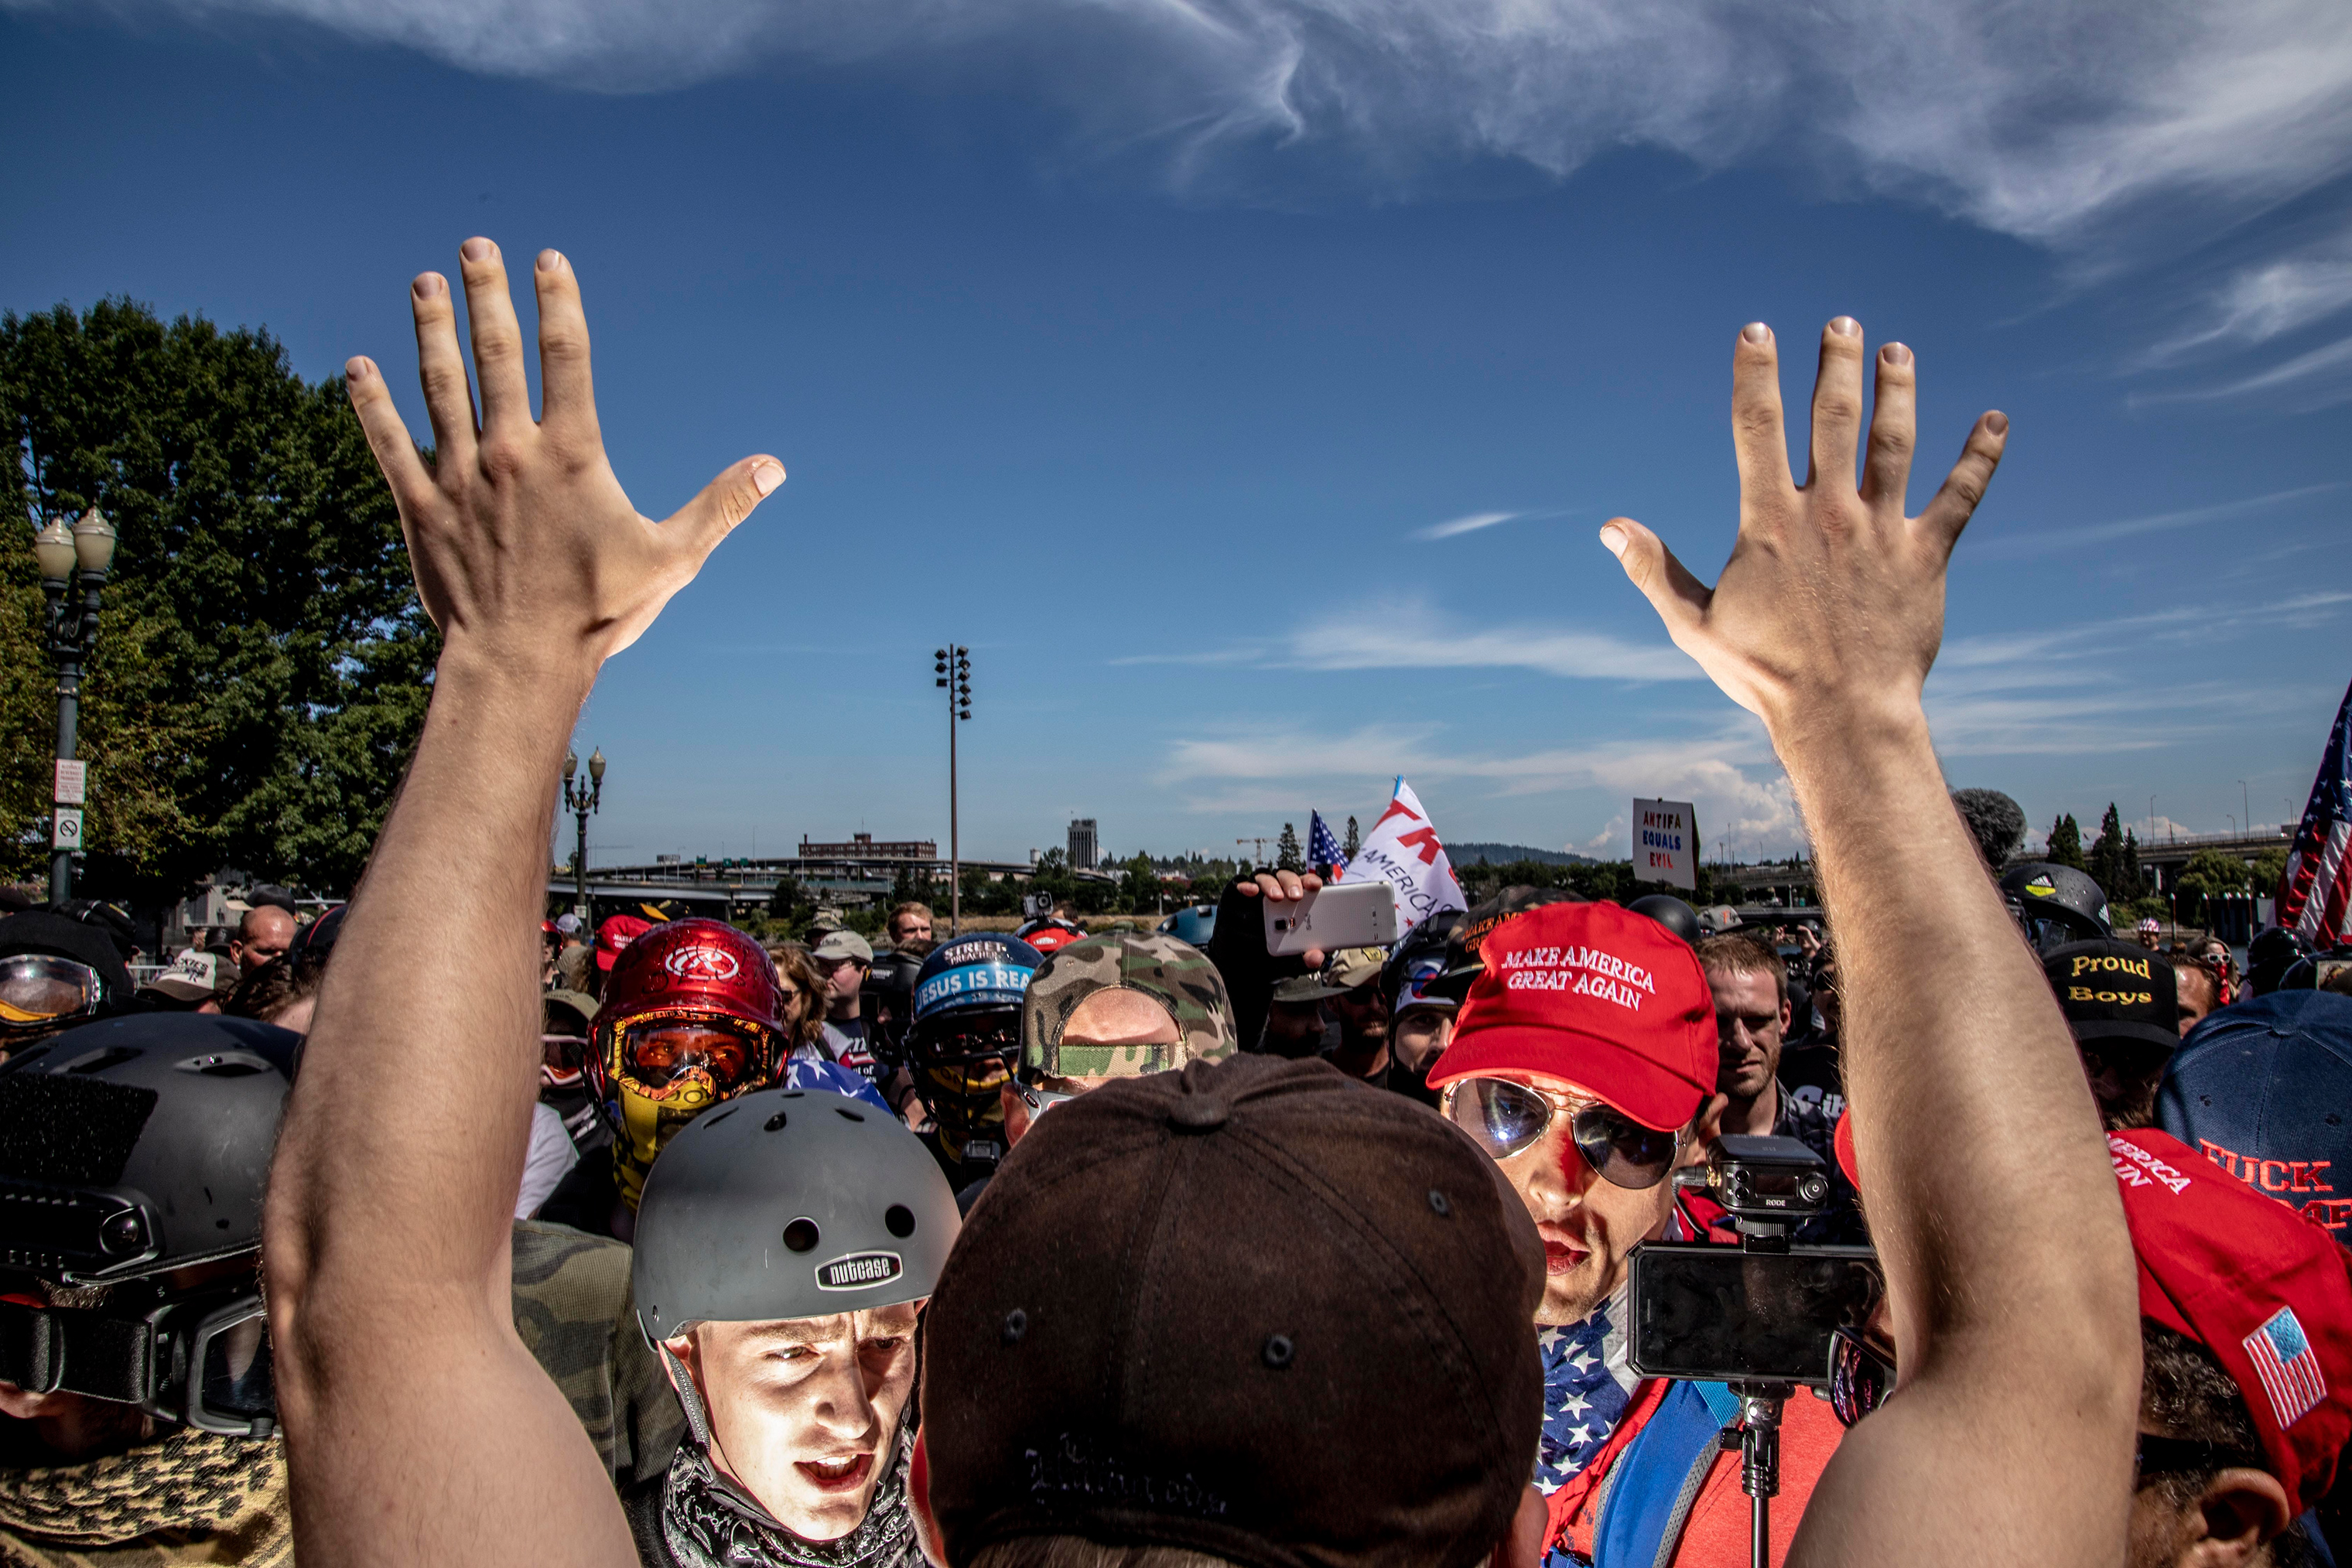 Patriot Prayer, a right-wing group, held a rally in Portland, Ore., where they were met by anti-fascist counter-protesters, on Aug. 4, 2018. (Mark Peterson—Redux)